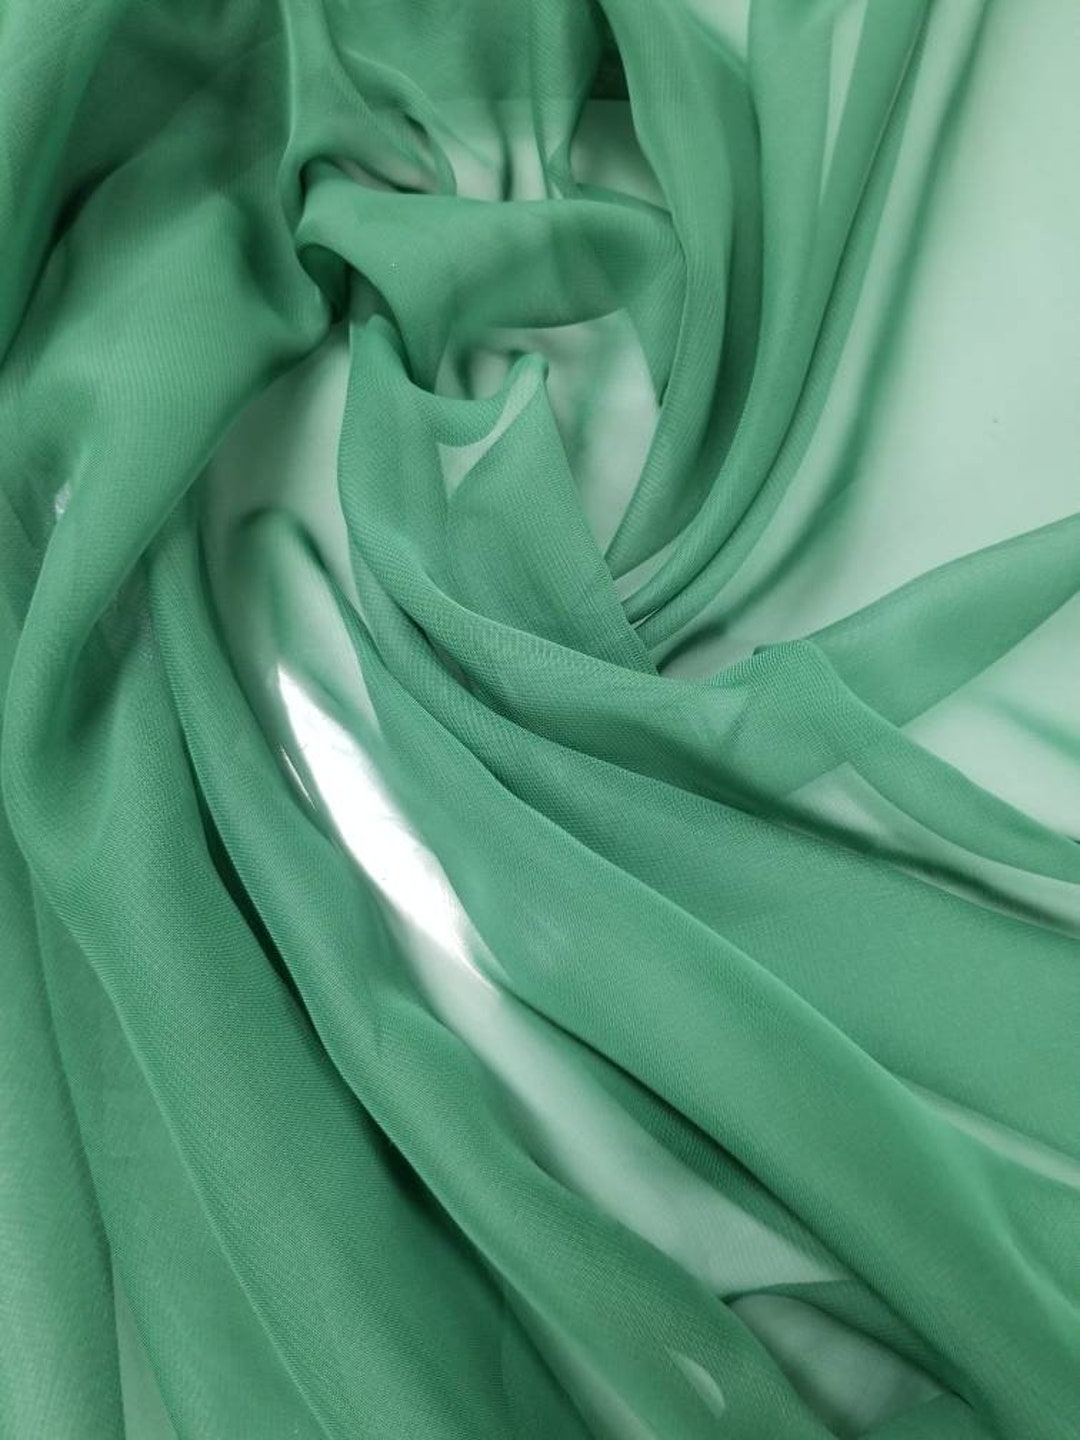 Emerald Green Color Chiffon 45 Wide. Usable for Apparel and Interior ...